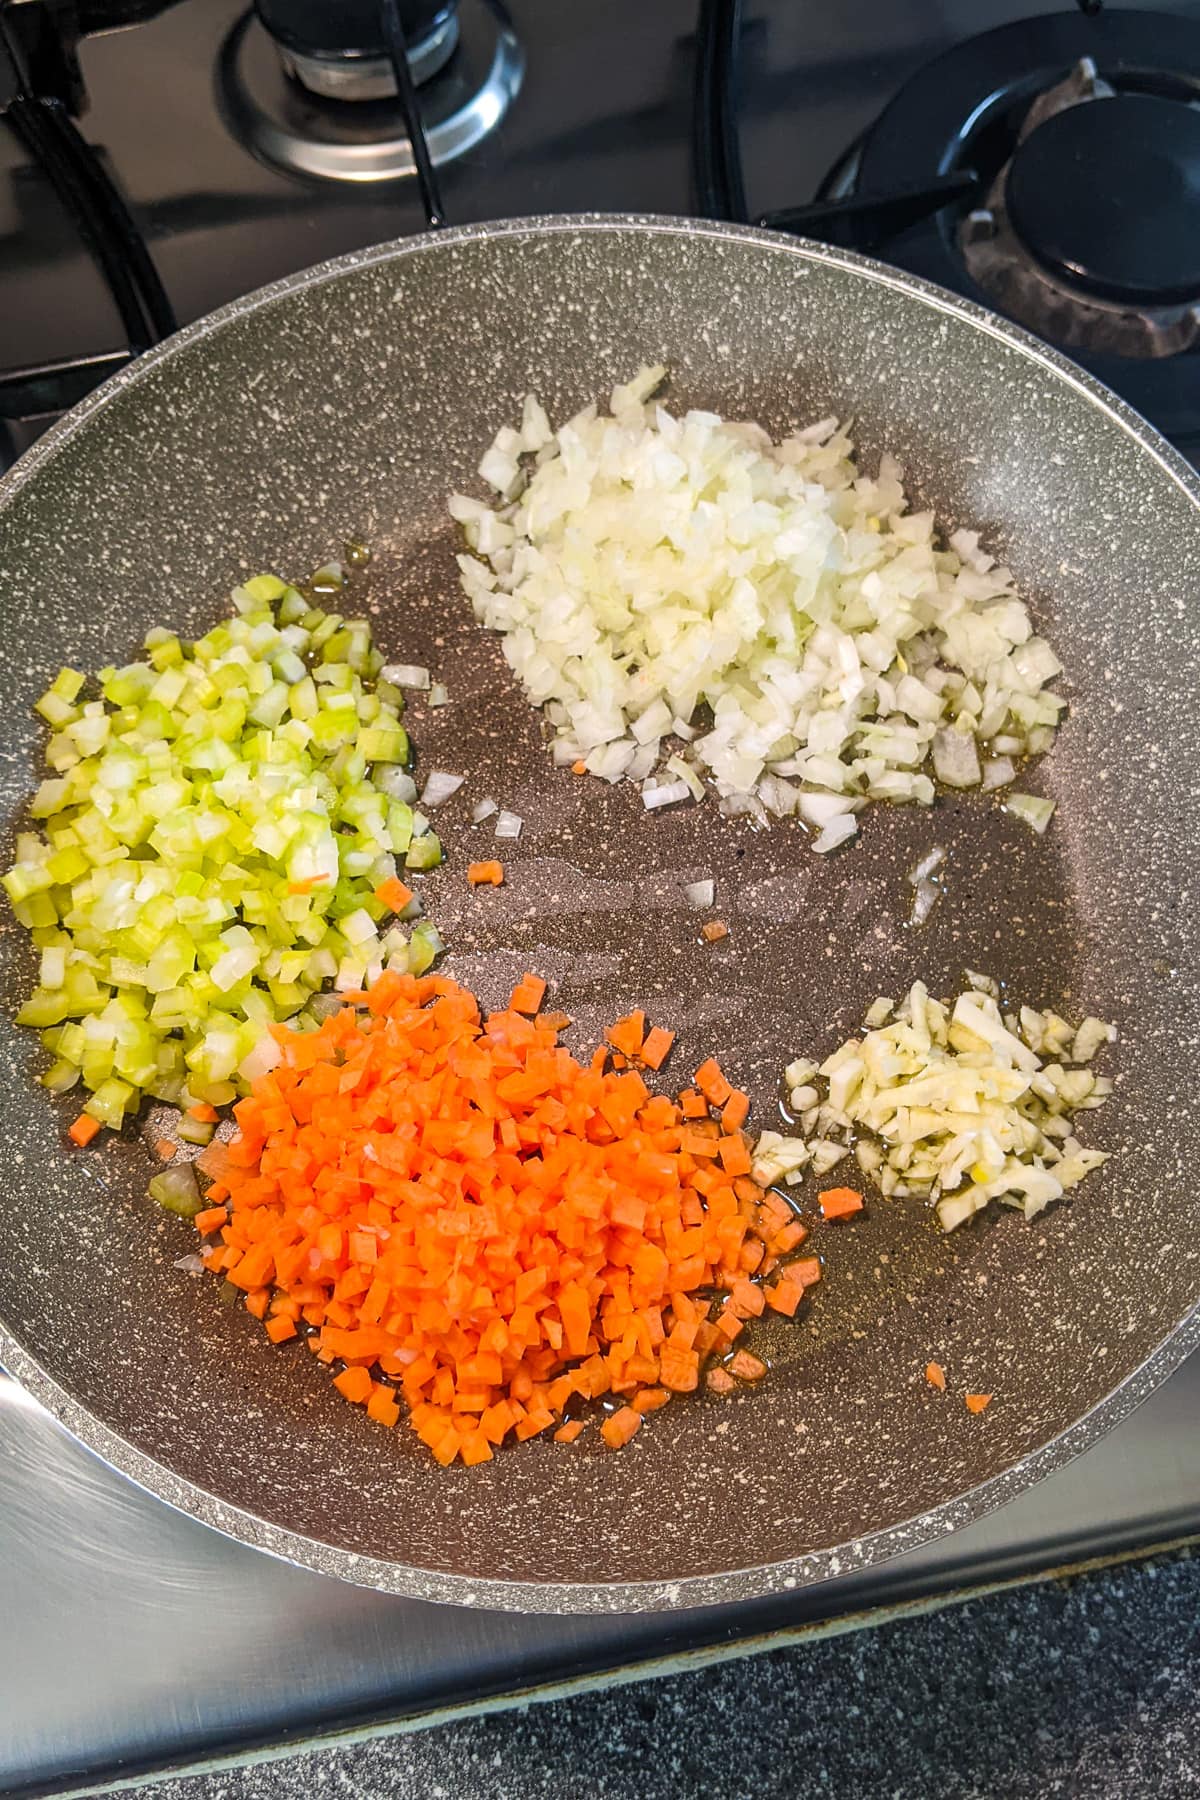 Chopped carrots, onions and leek on a frying pan.